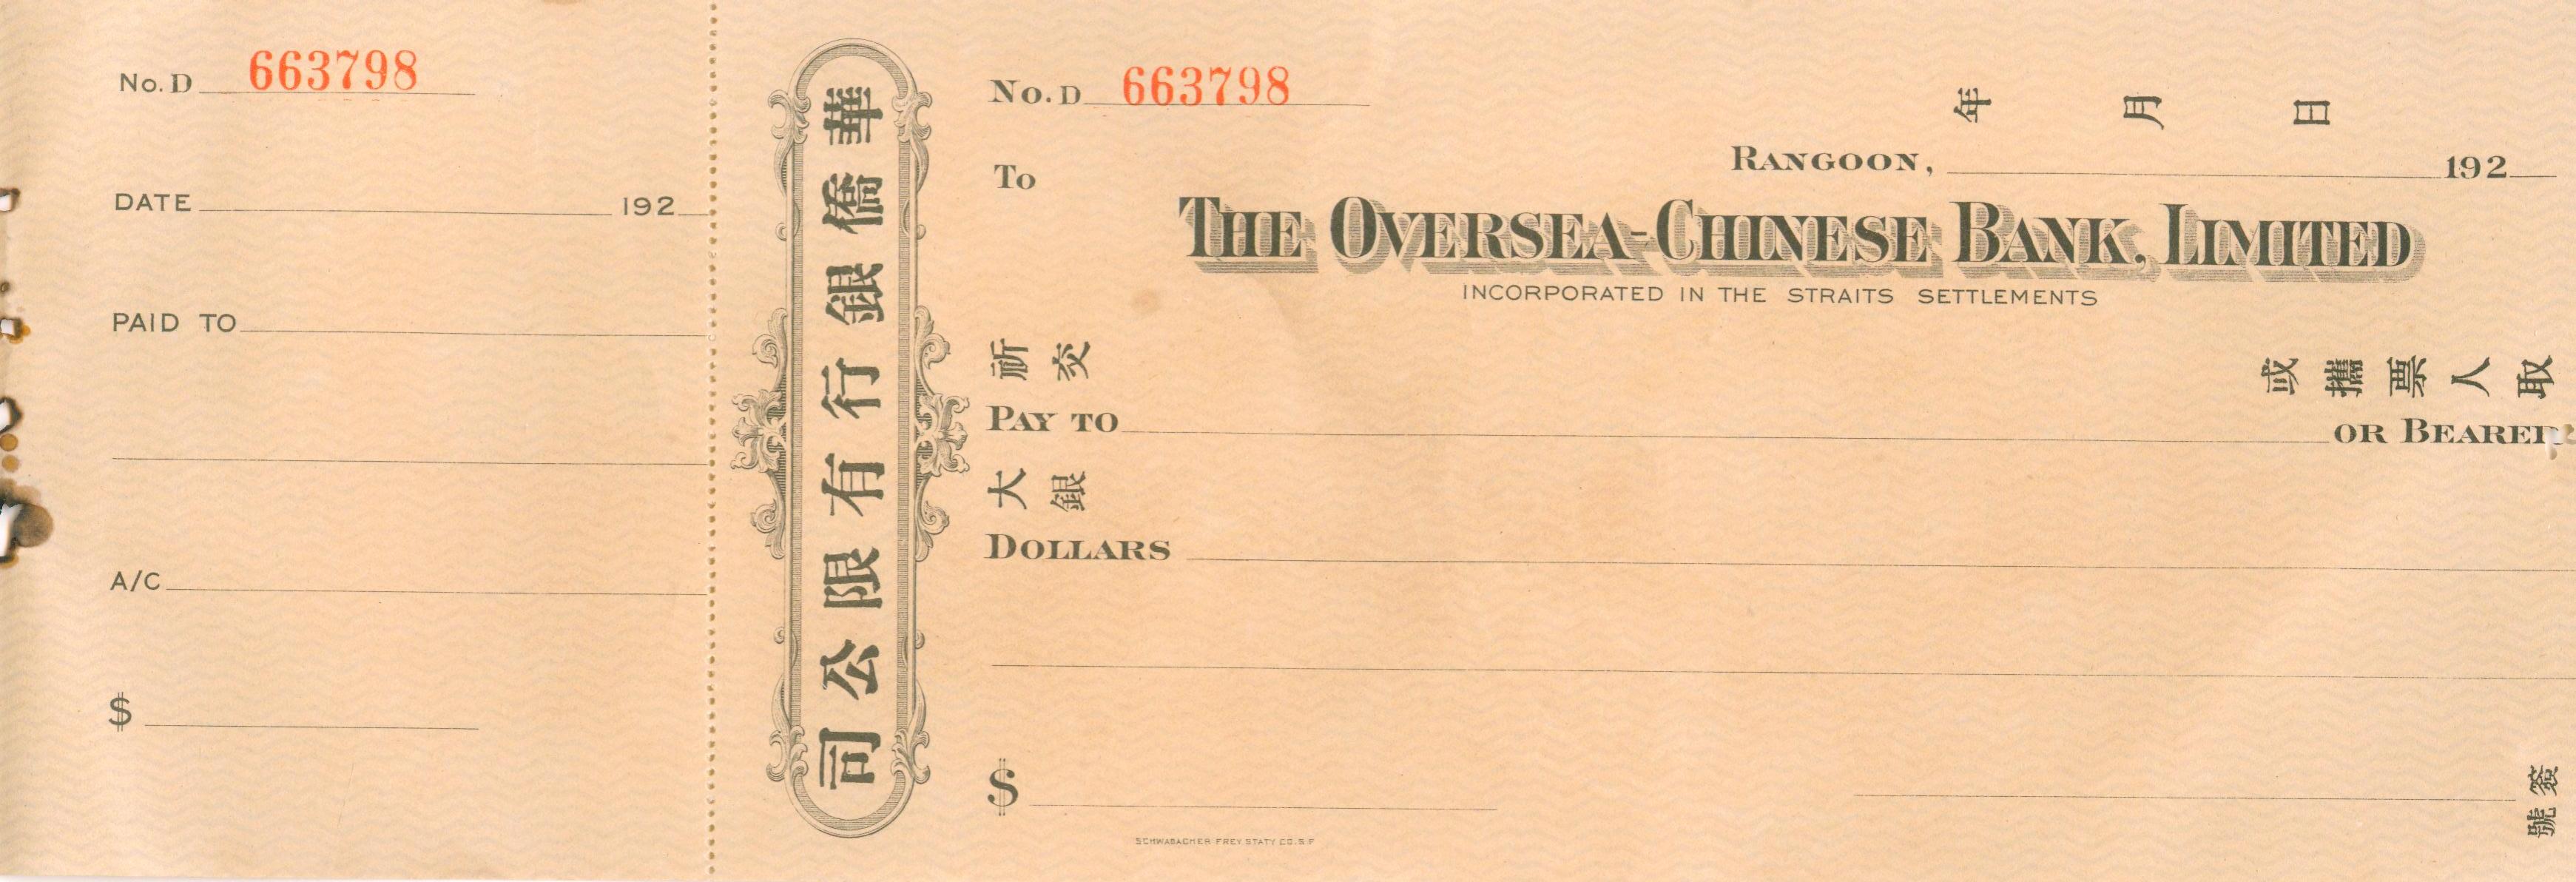 D2754, Check of Oversea-Chinese Bank Limited (Rangoon), Singapore Cheque 1920's